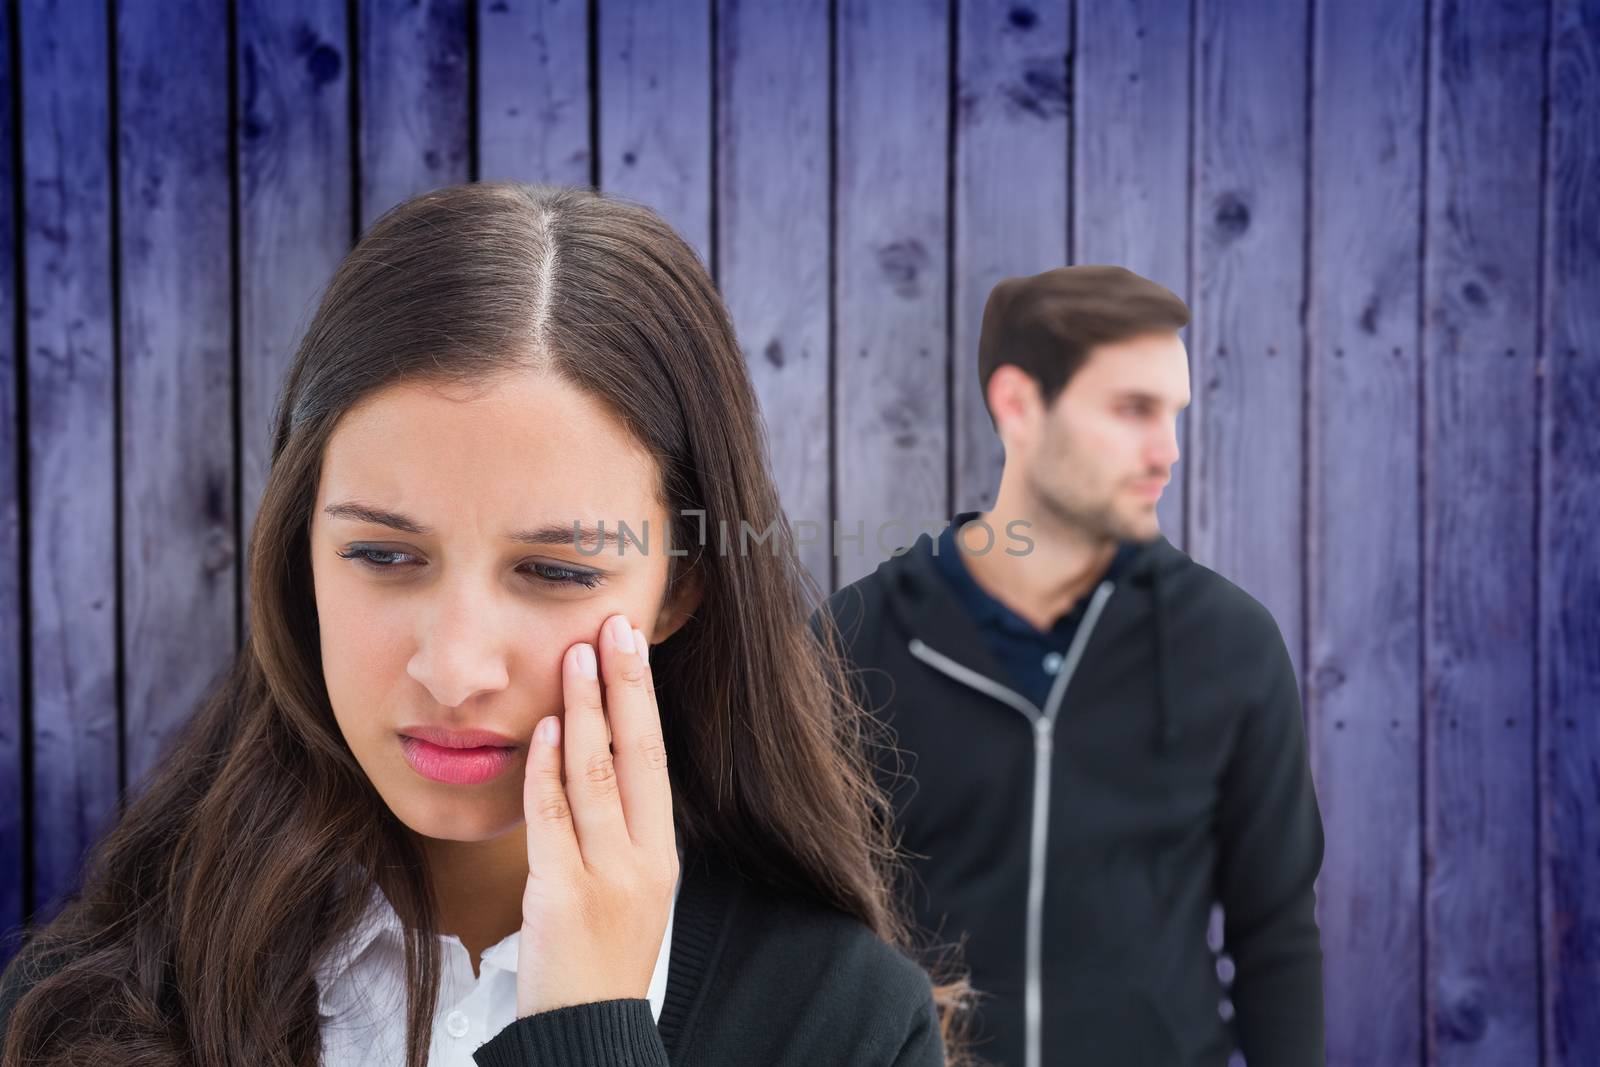 Unhappy couple not speaking to each other  against wooden planks background